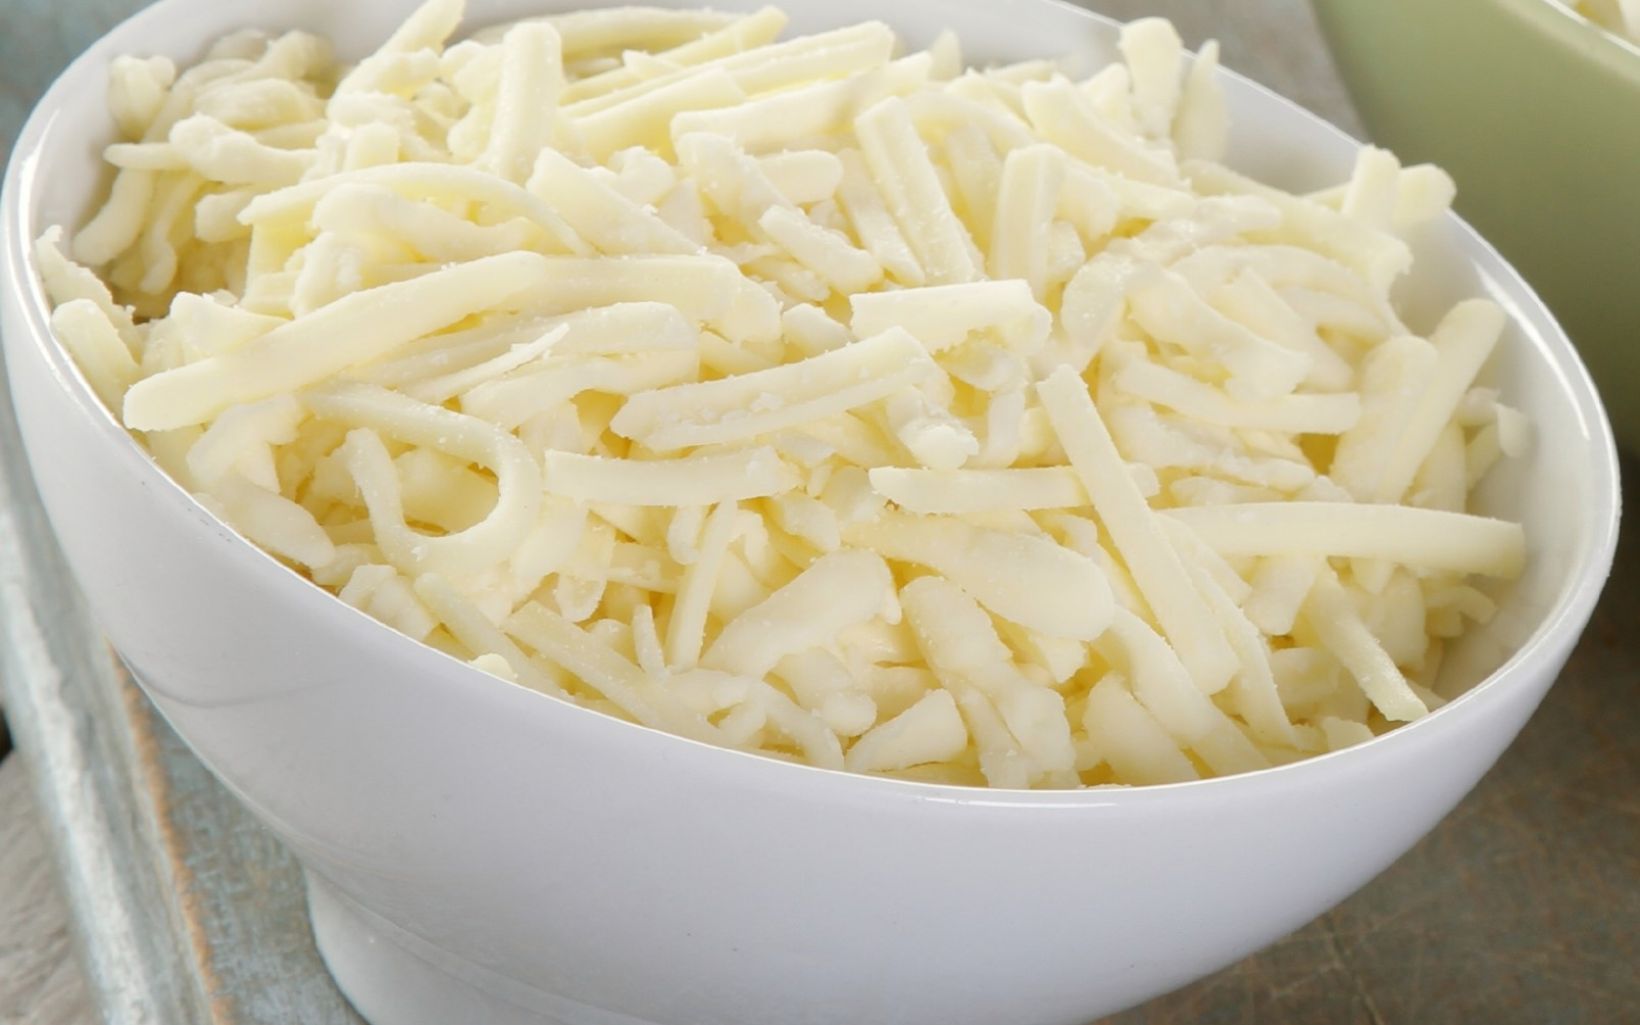 6325 J S Bailey Grated Mild White Cheddar